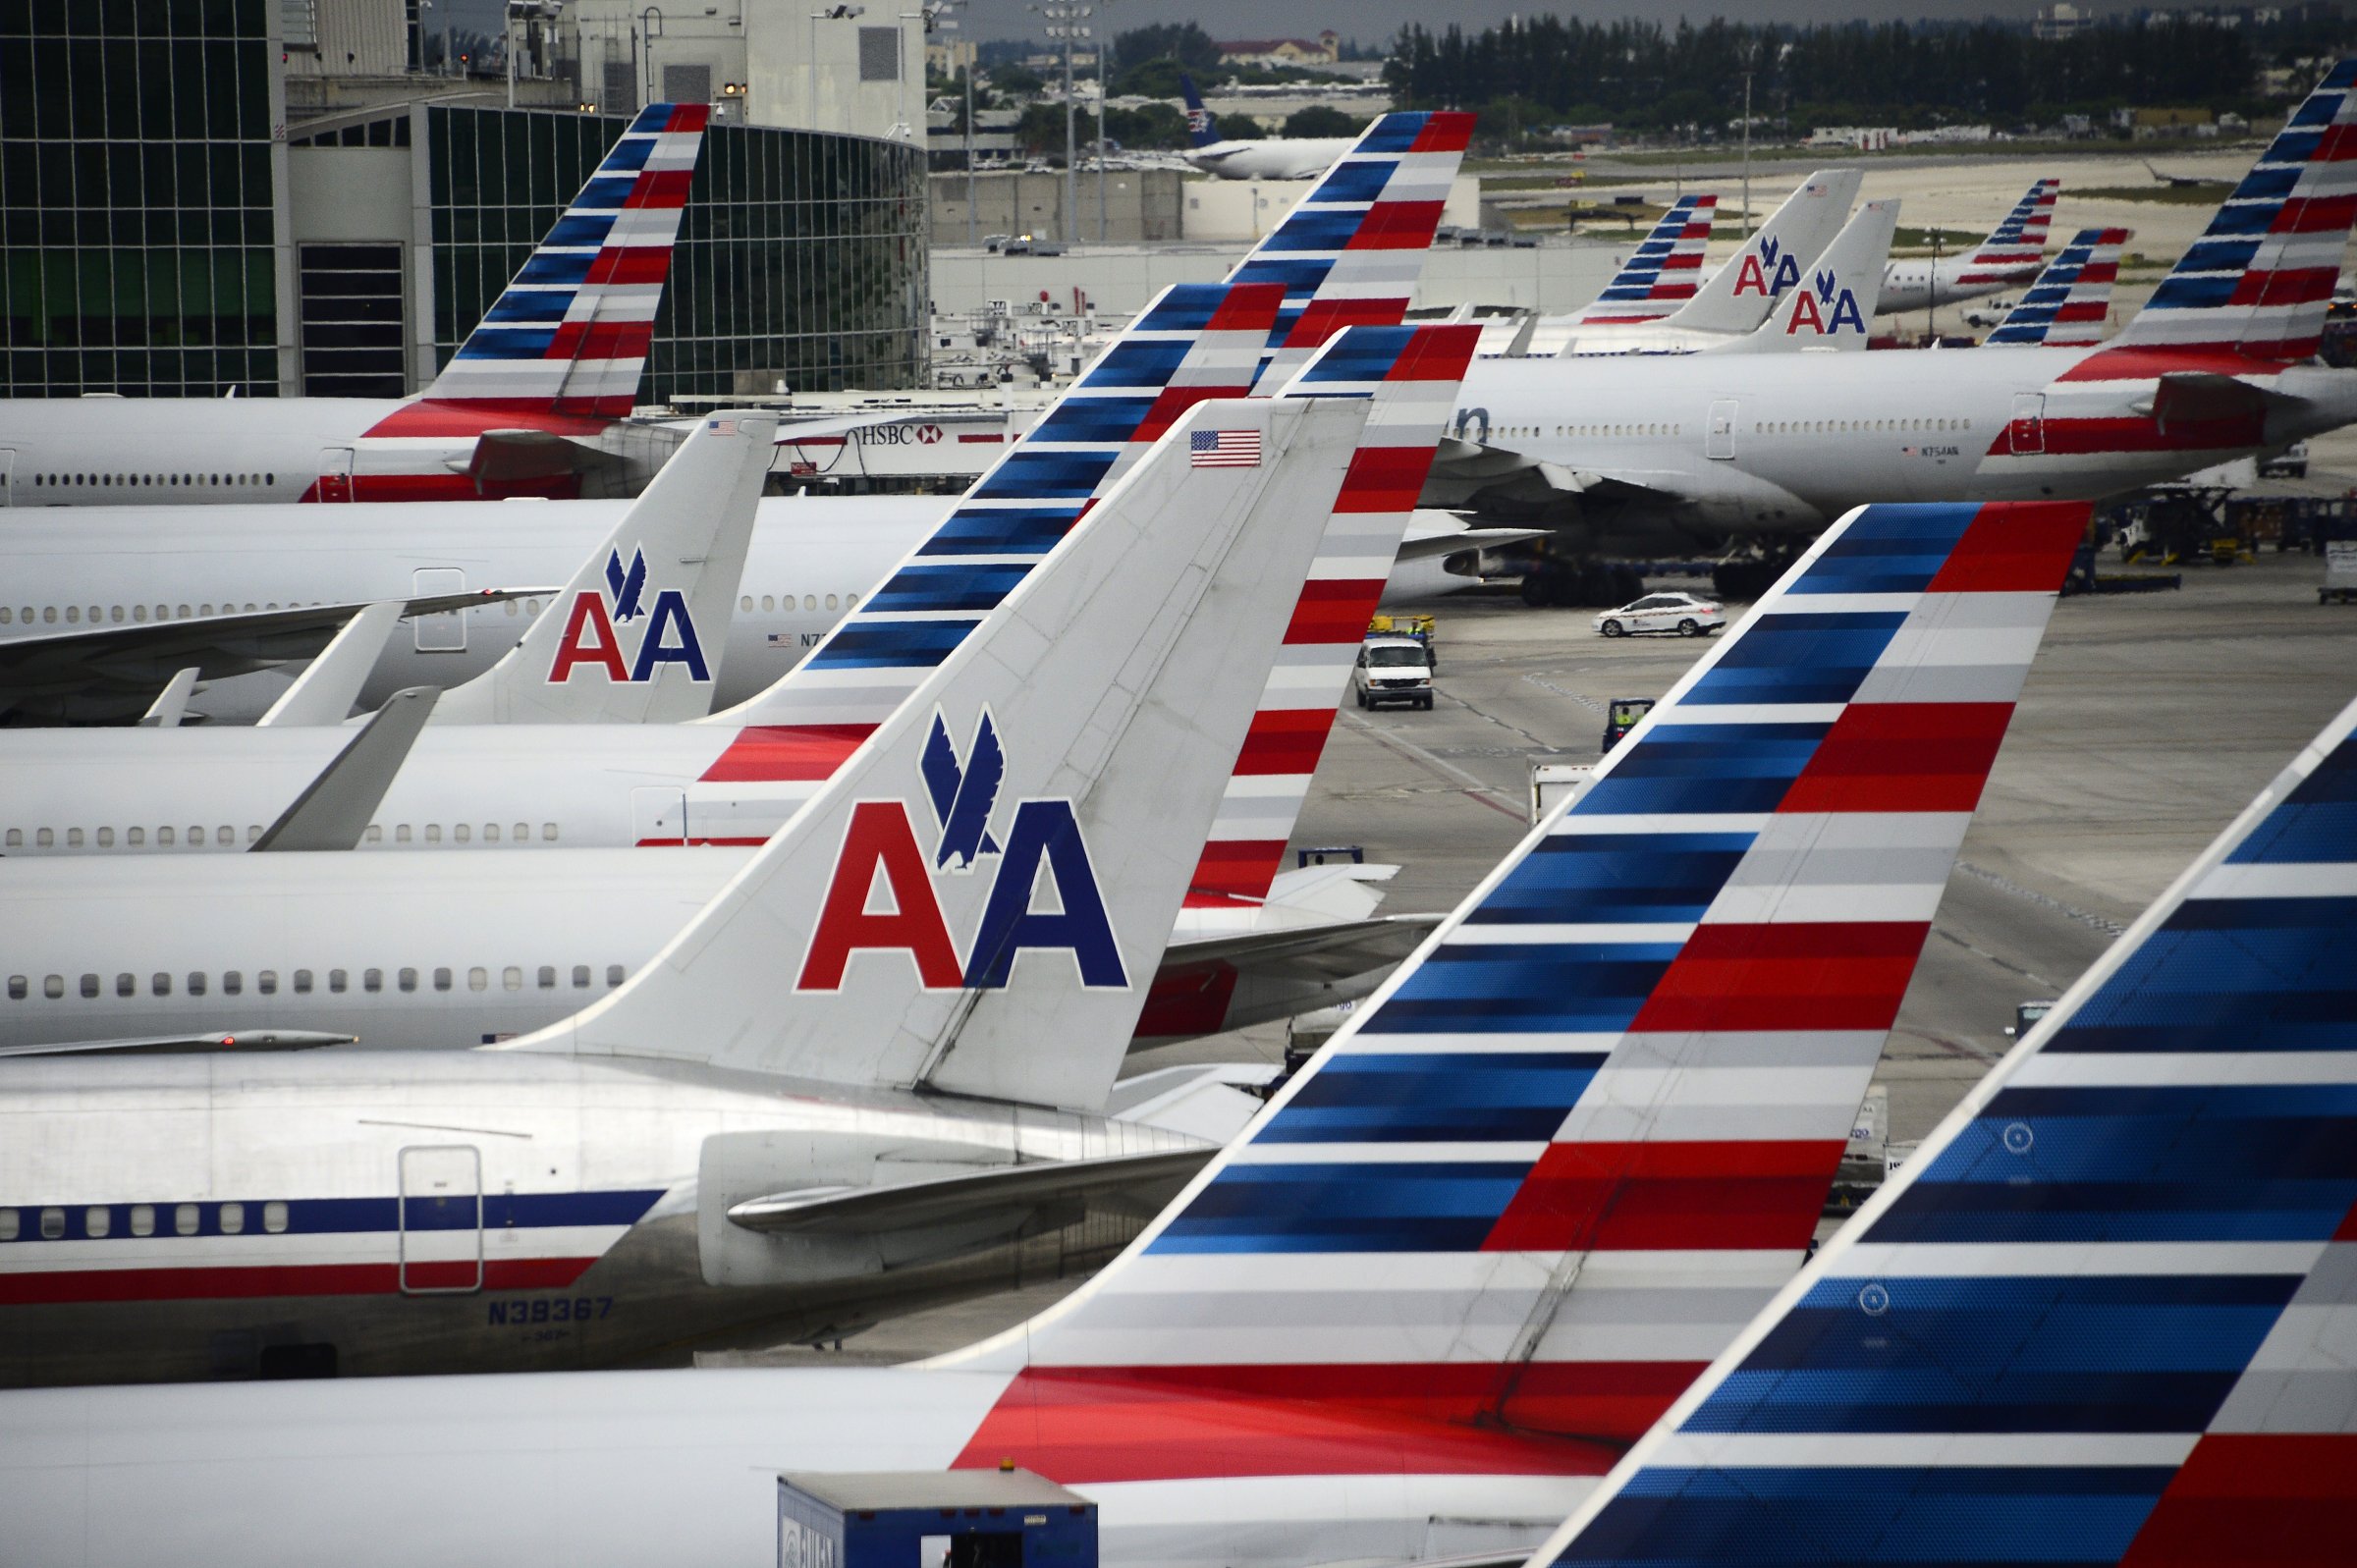 American Airlines passenger planes are seen on the tarmac at Miami International Airport in Miami, Florida, June 8, 2015.